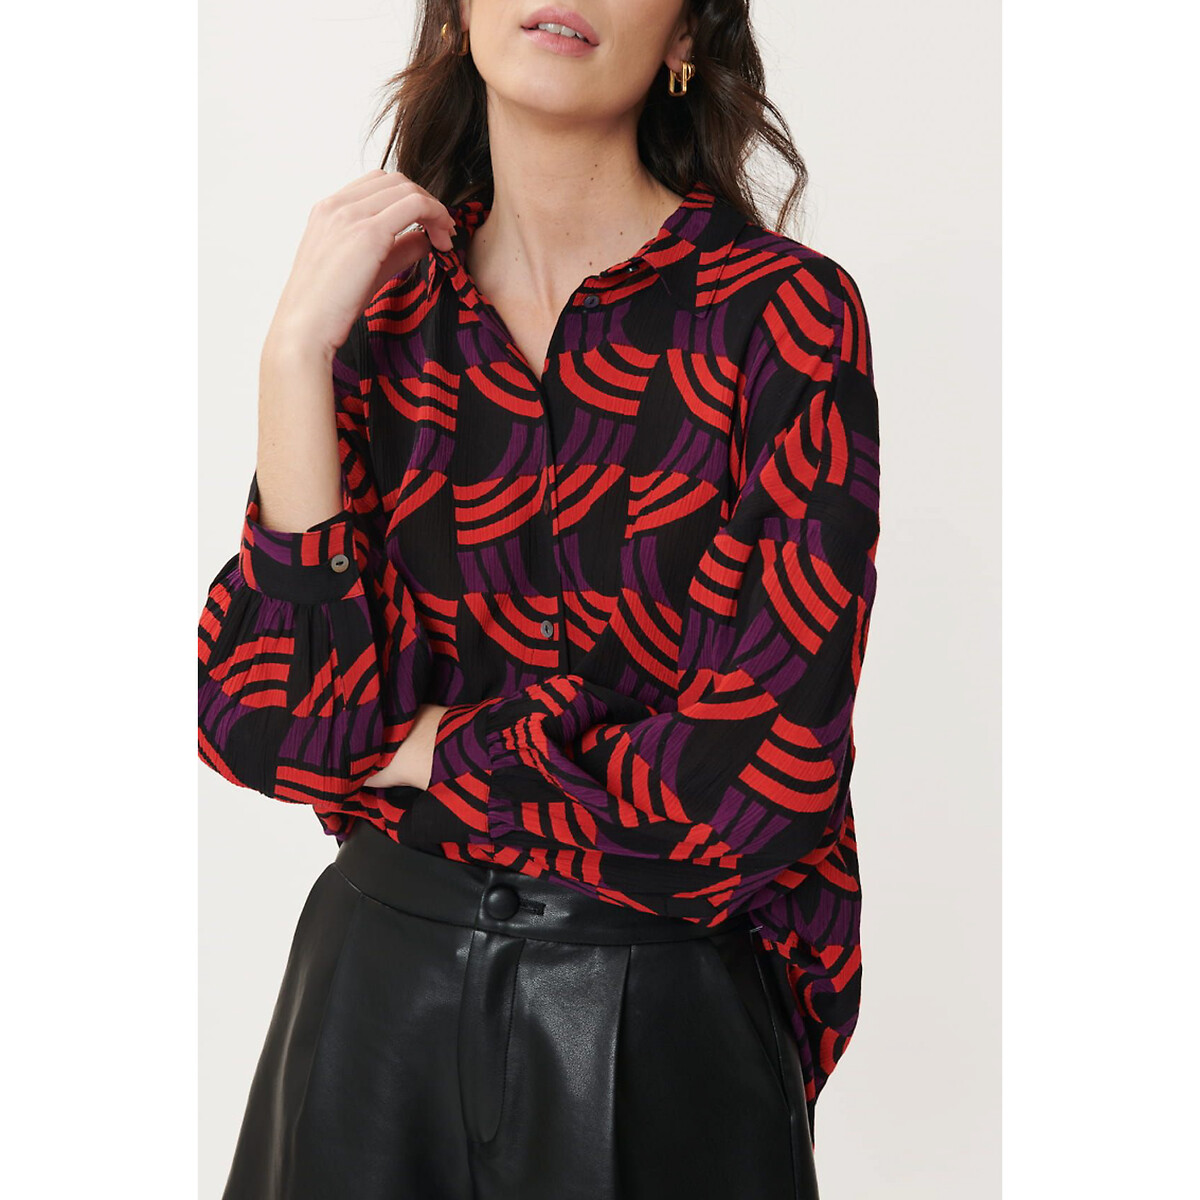 Graphic Print Blouse with 3/4 Length Sleeves